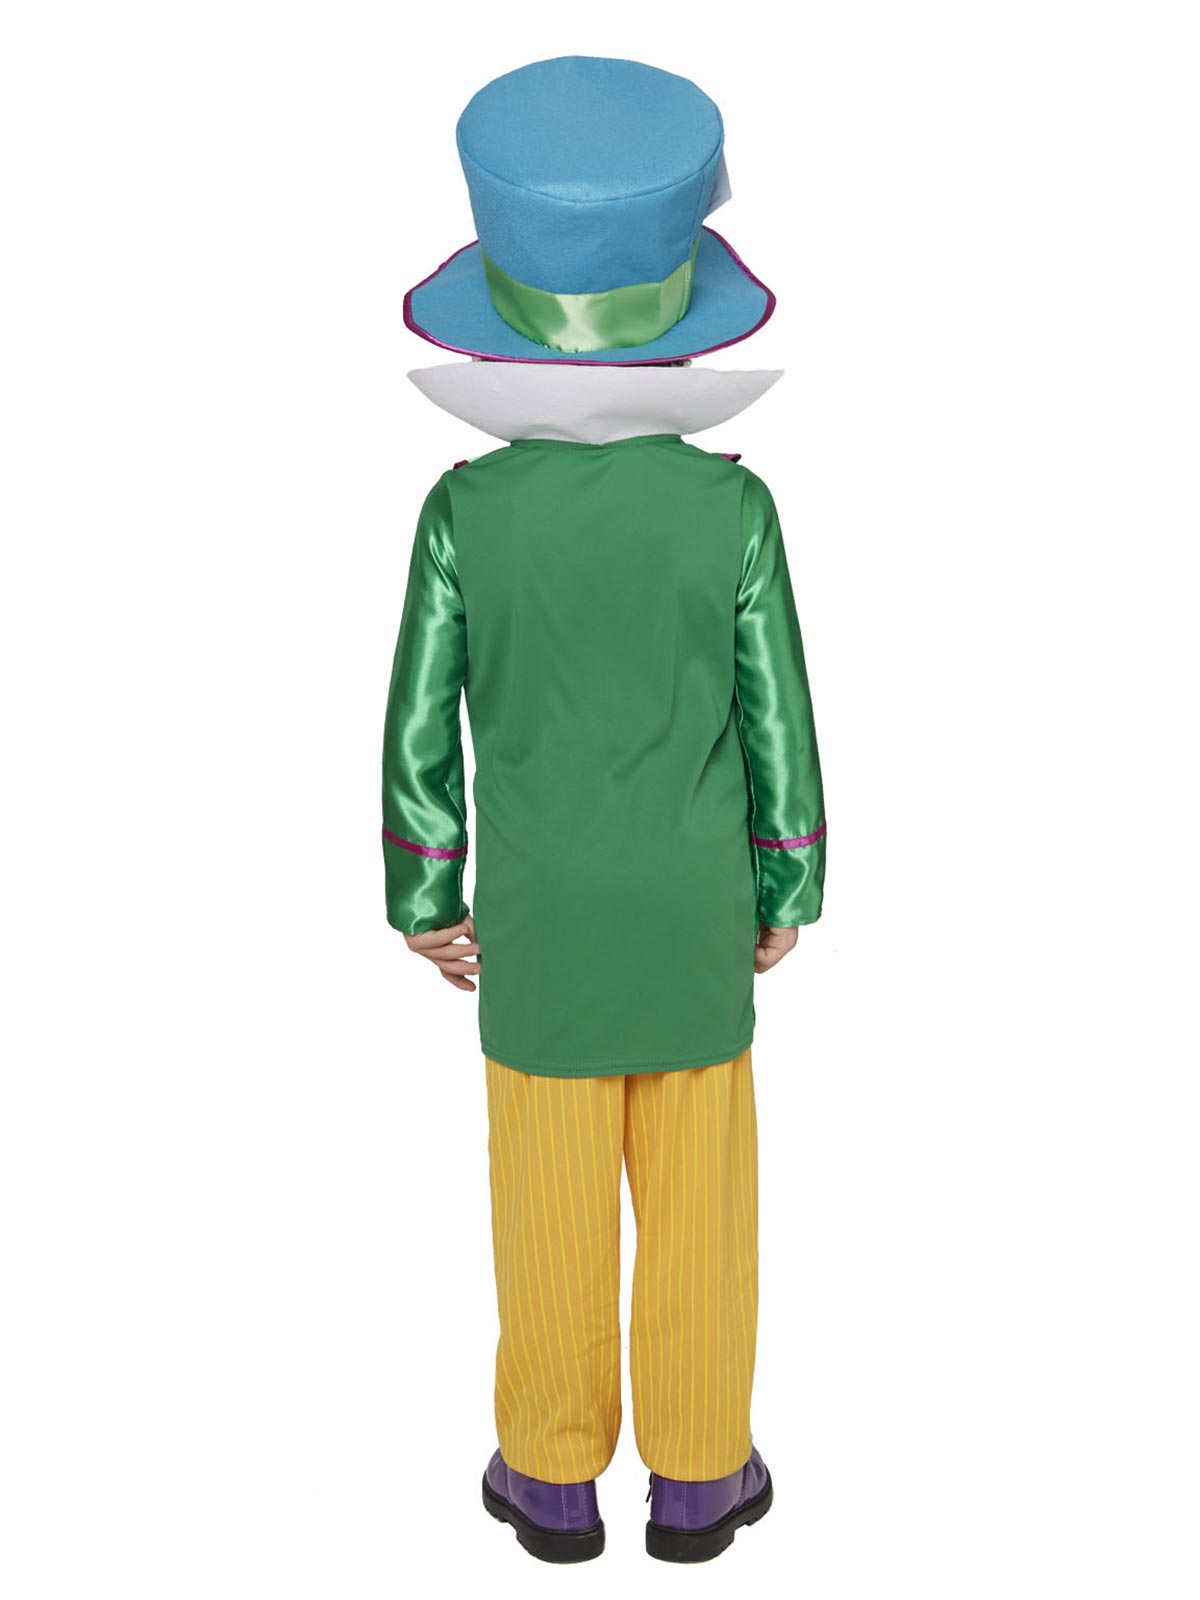 MAD HATTER BOYS DELUXE BOYS CHILD COSTUME